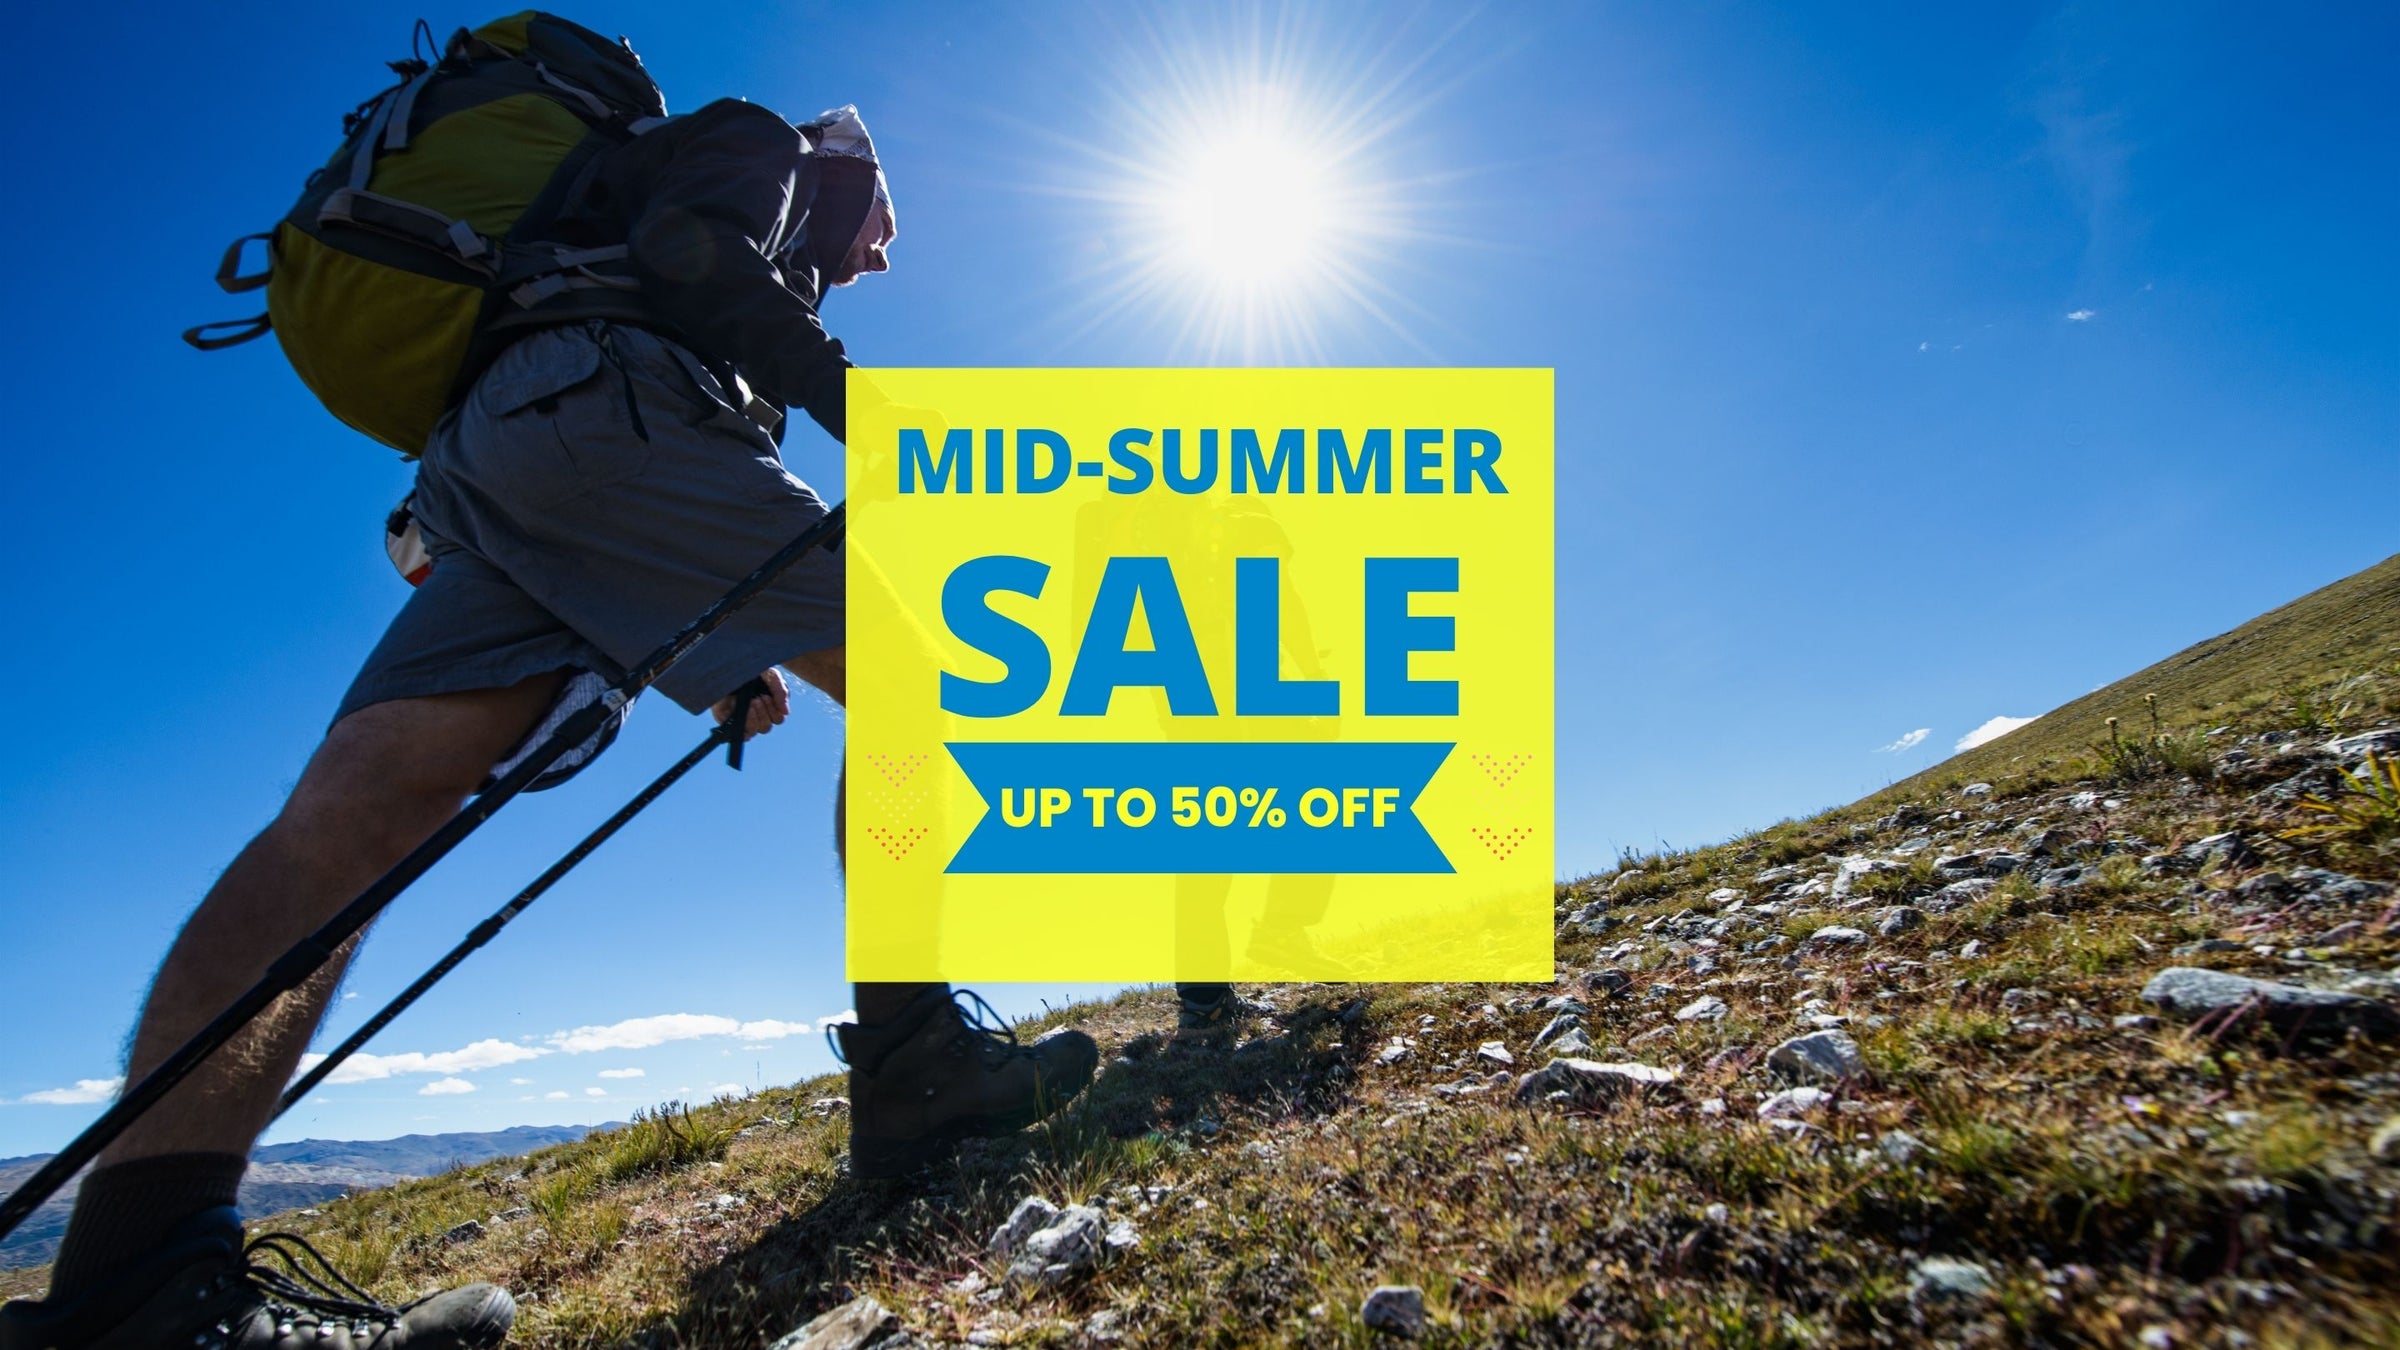 Mid-Summer Sale up to 50% Off